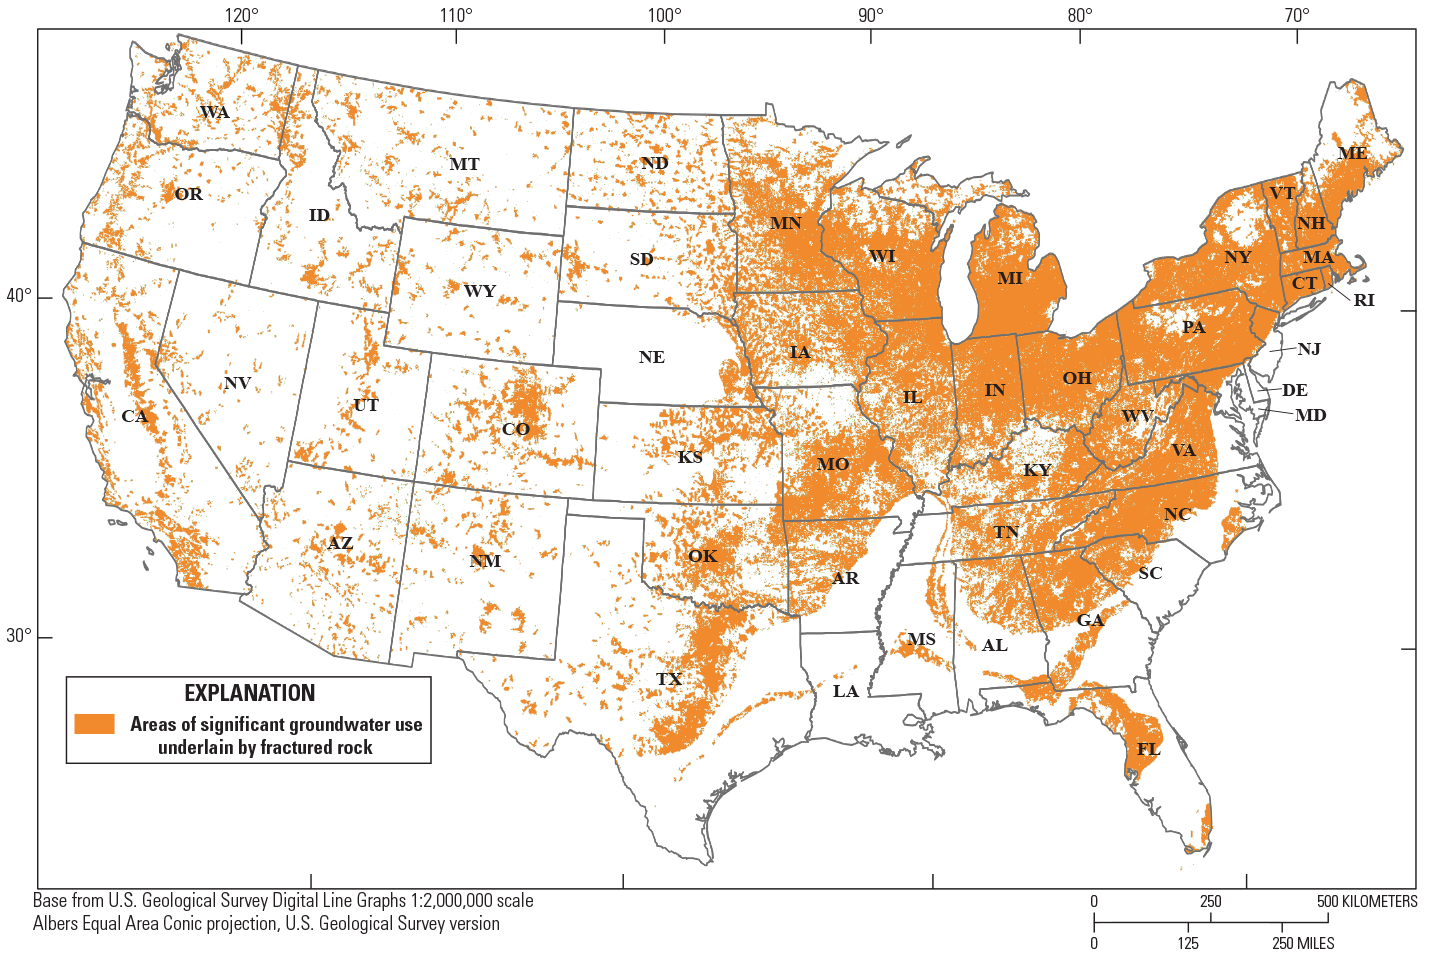 Significant groundwater usage in areas underlain by fractured rock are primarily in
                     the eastern and the upper Midwest United States